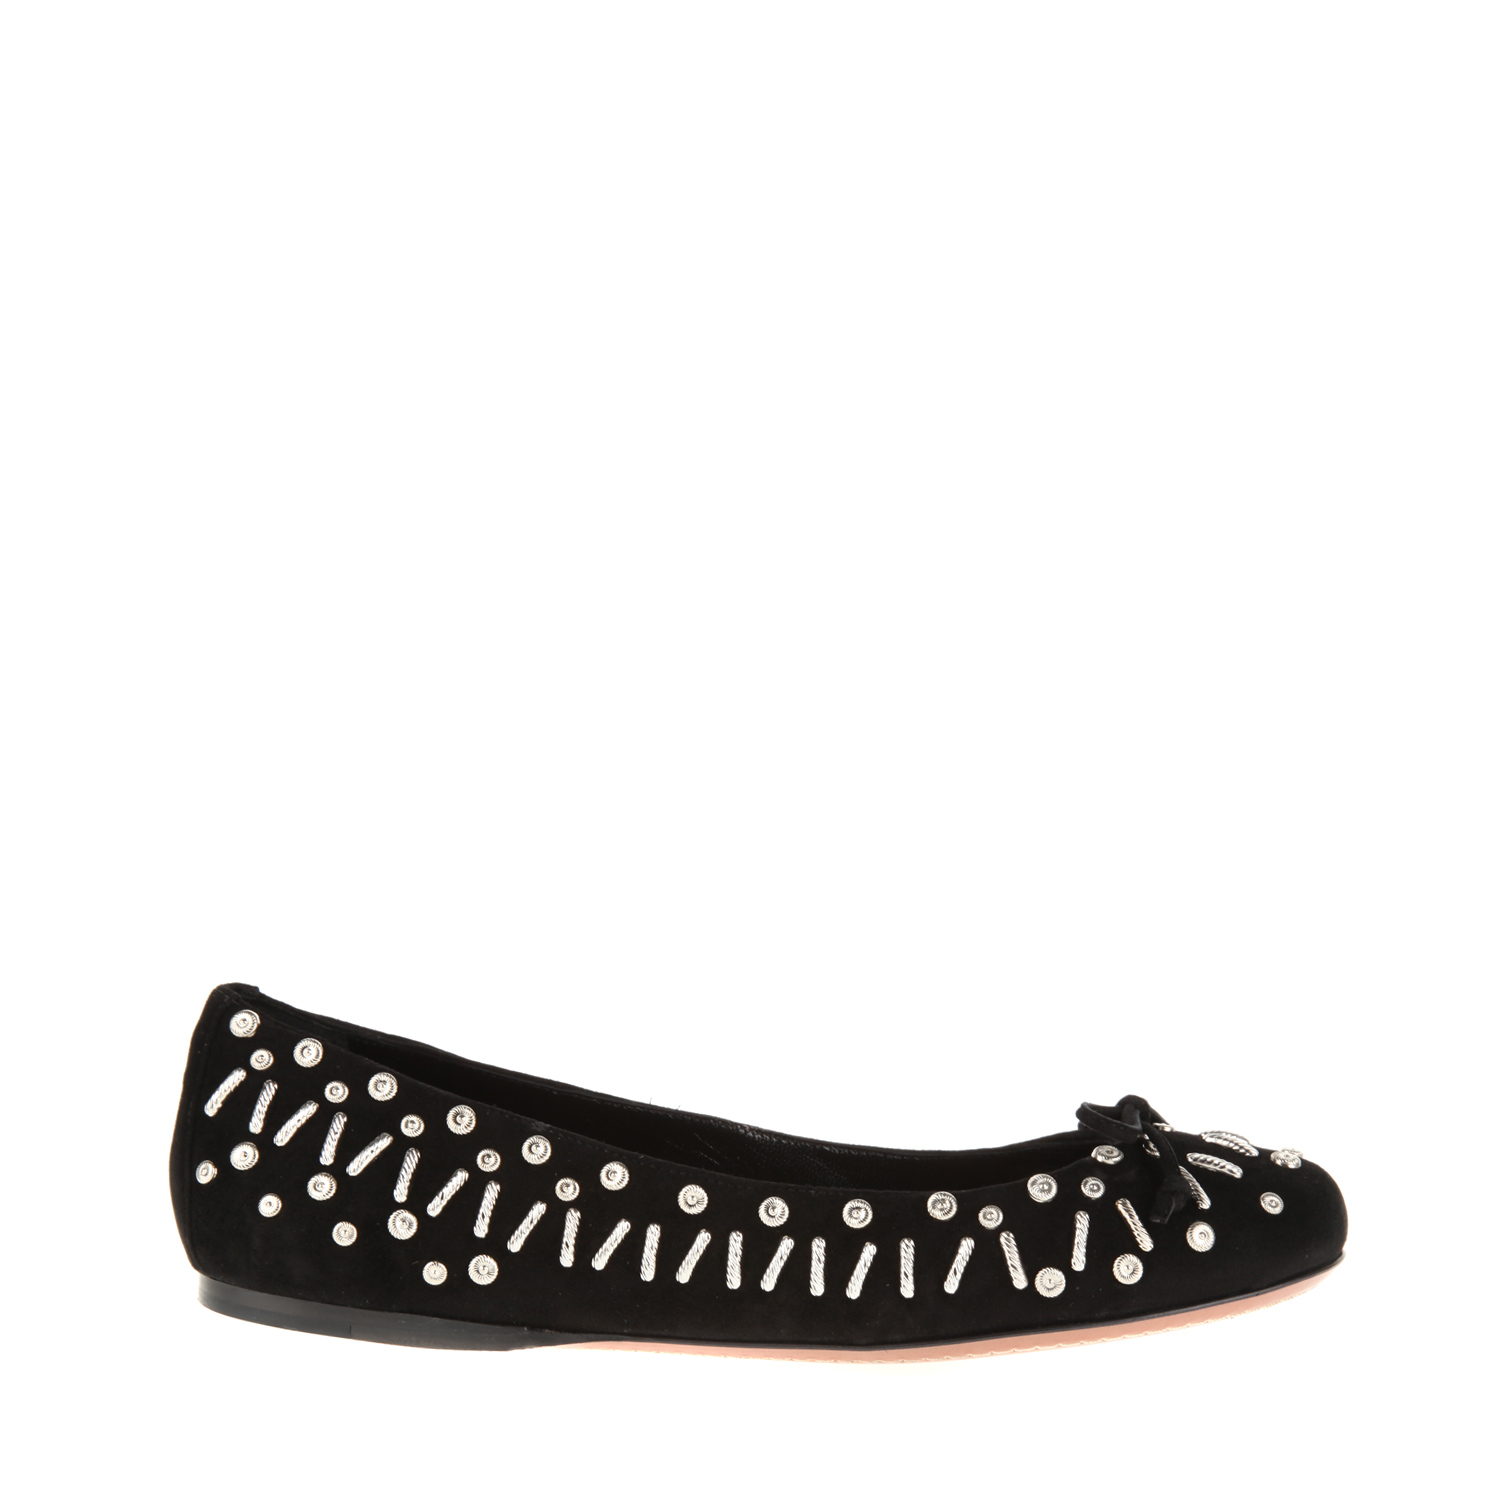 Alaïa Black Suede Ballet Flats with Silver Metal Studs in Black | Lyst